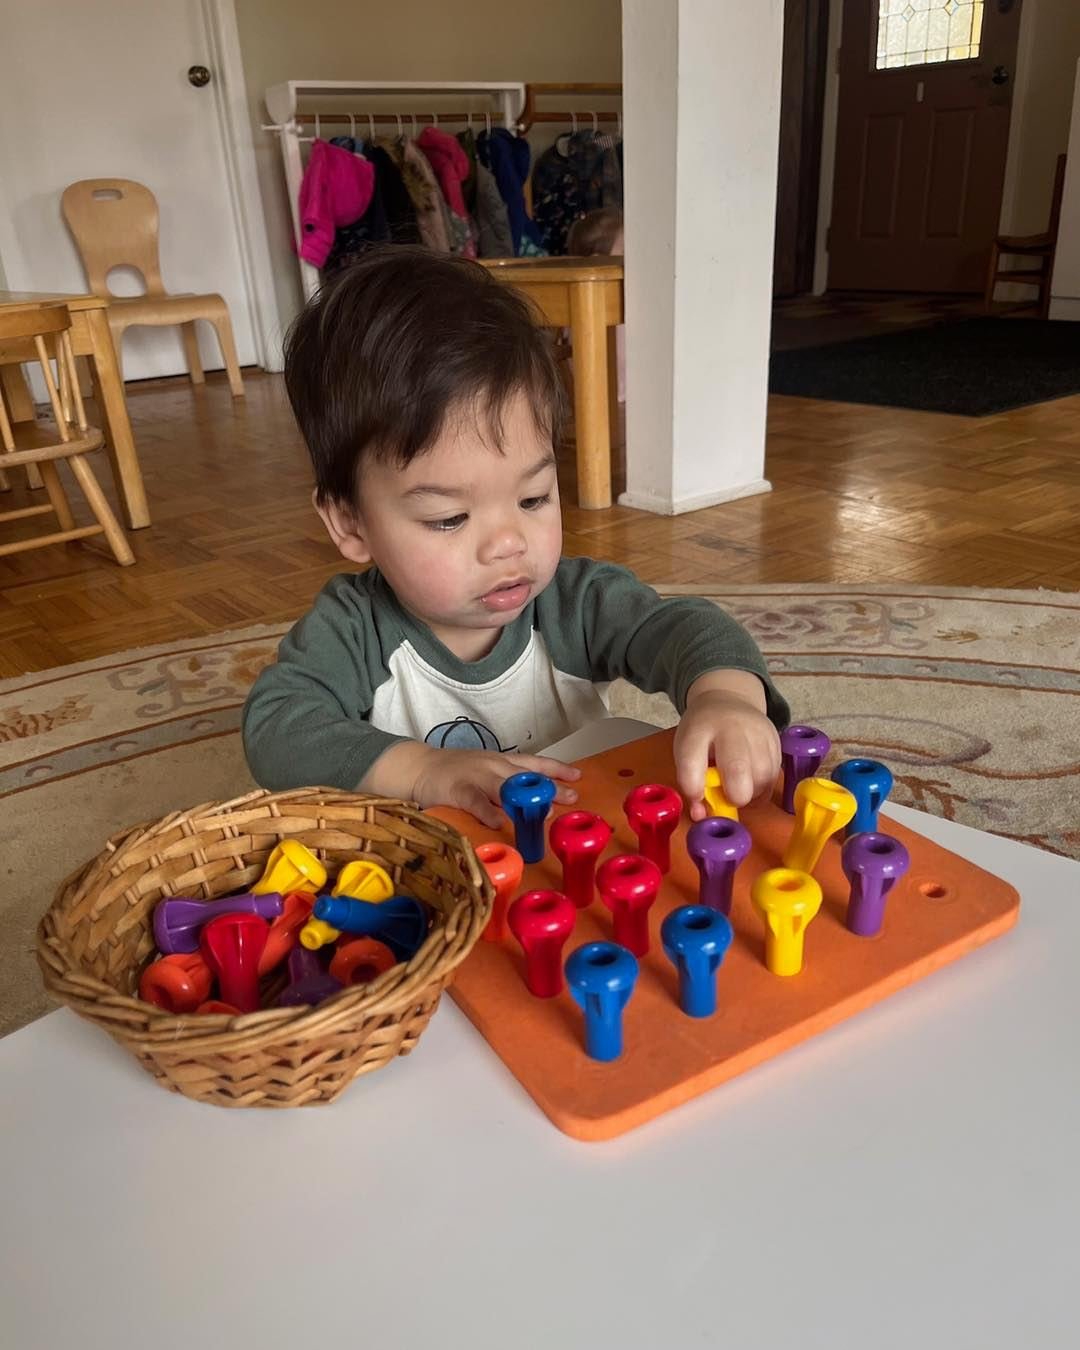 Between the ages of 18 months and 3 years old, children crave the ability to do things on their own. Students of the MCH Toddler Classroom get to practice a lot of real life skills during their day and explore the materials in their environment. They